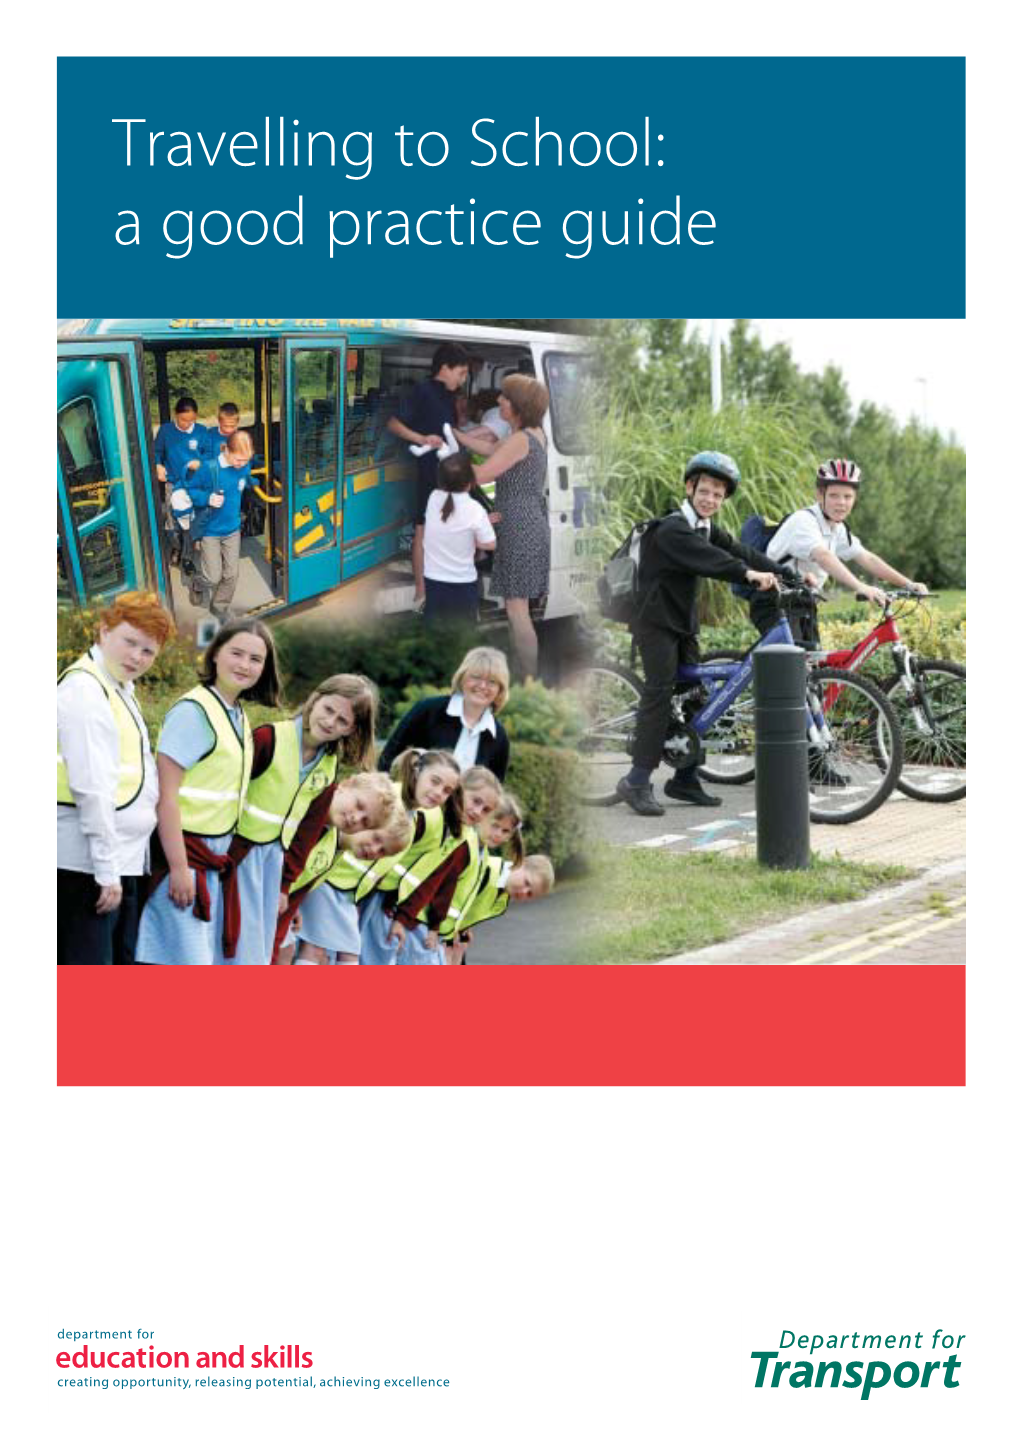 Travelling to School: a Good Practice Guide